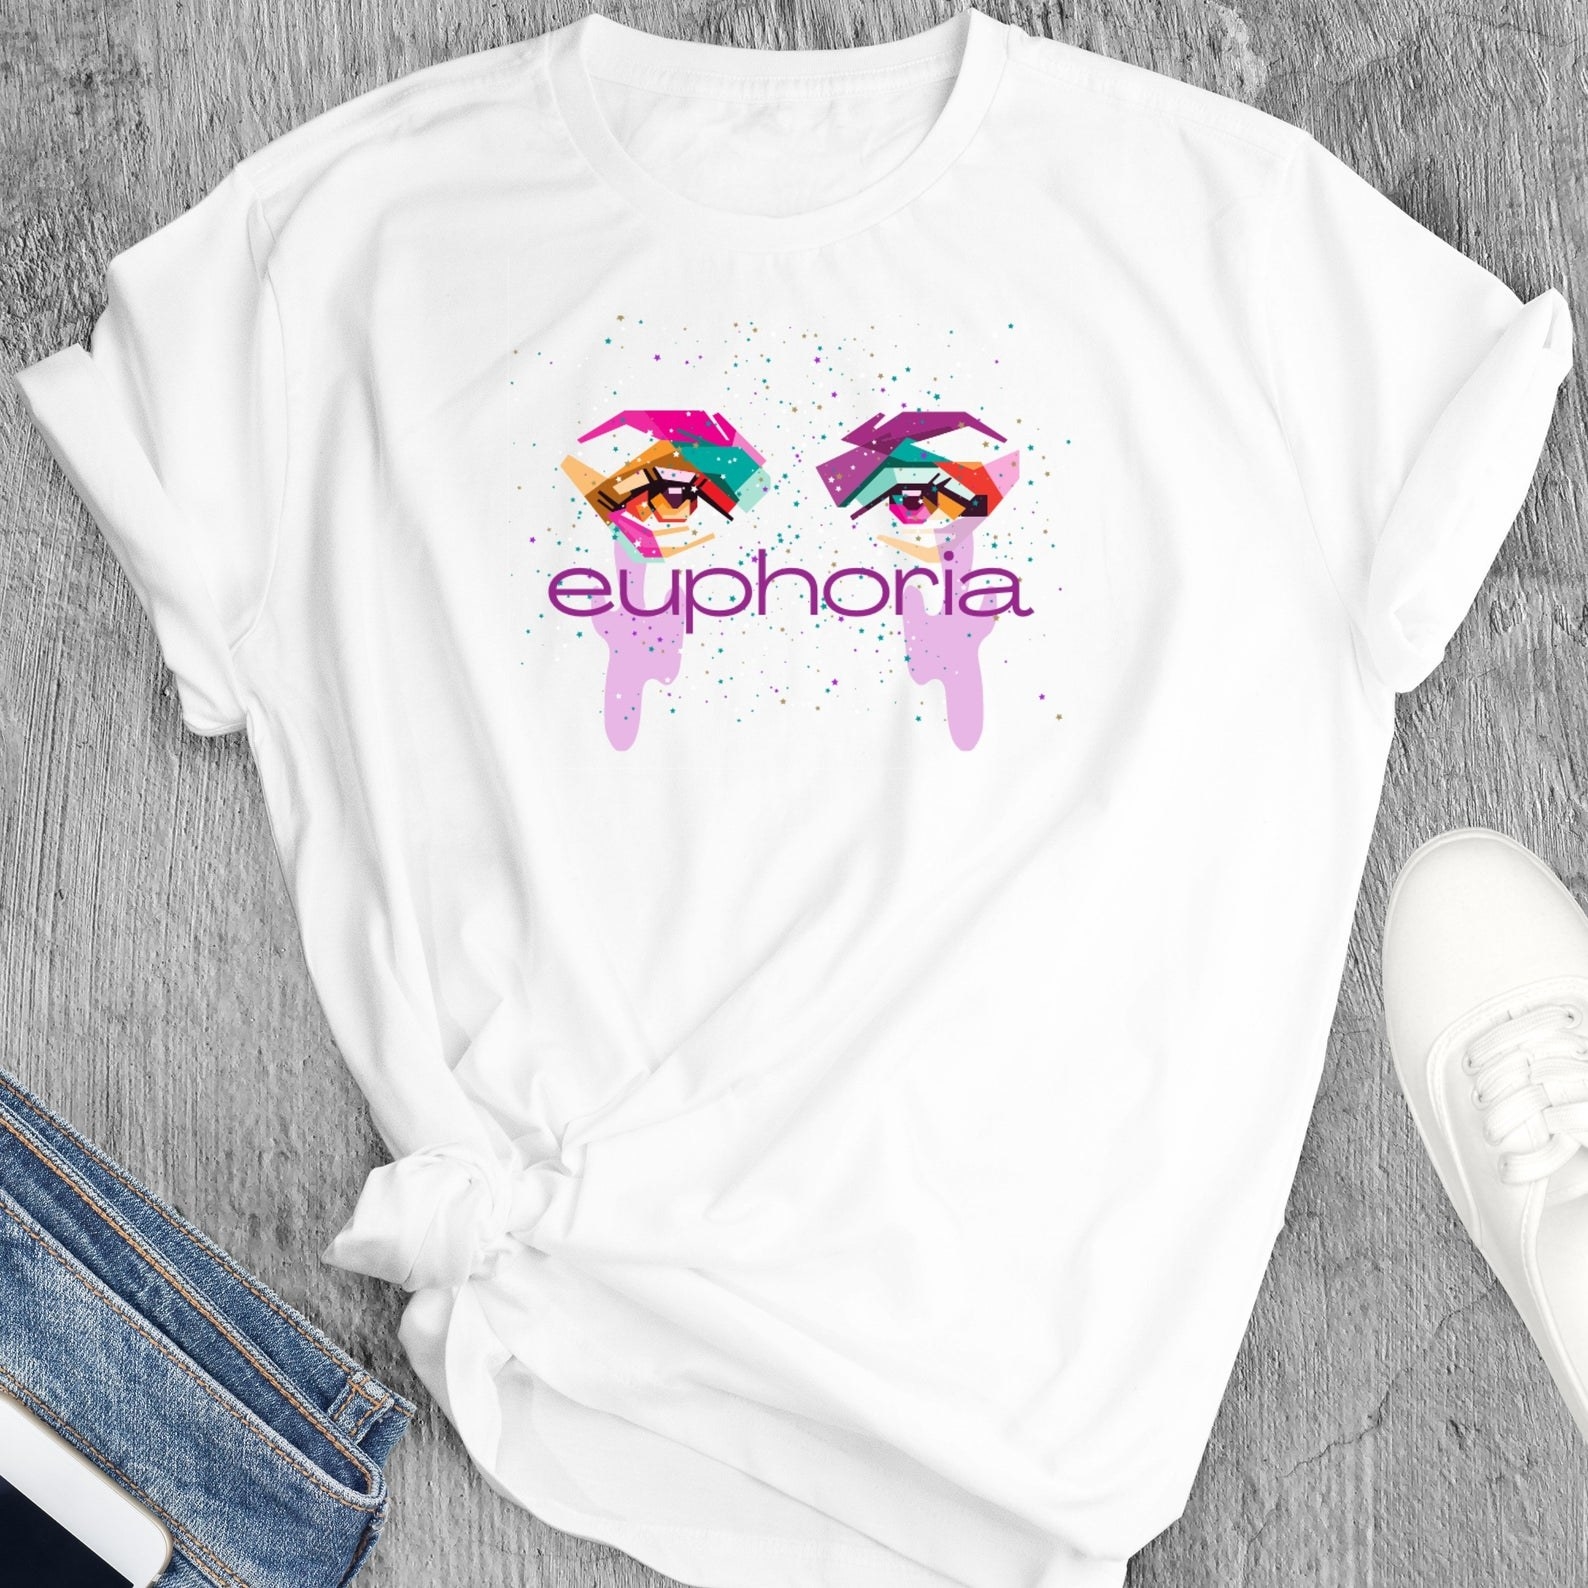 the euphoria inspired tshirt next to a pair of sneakers and jeans